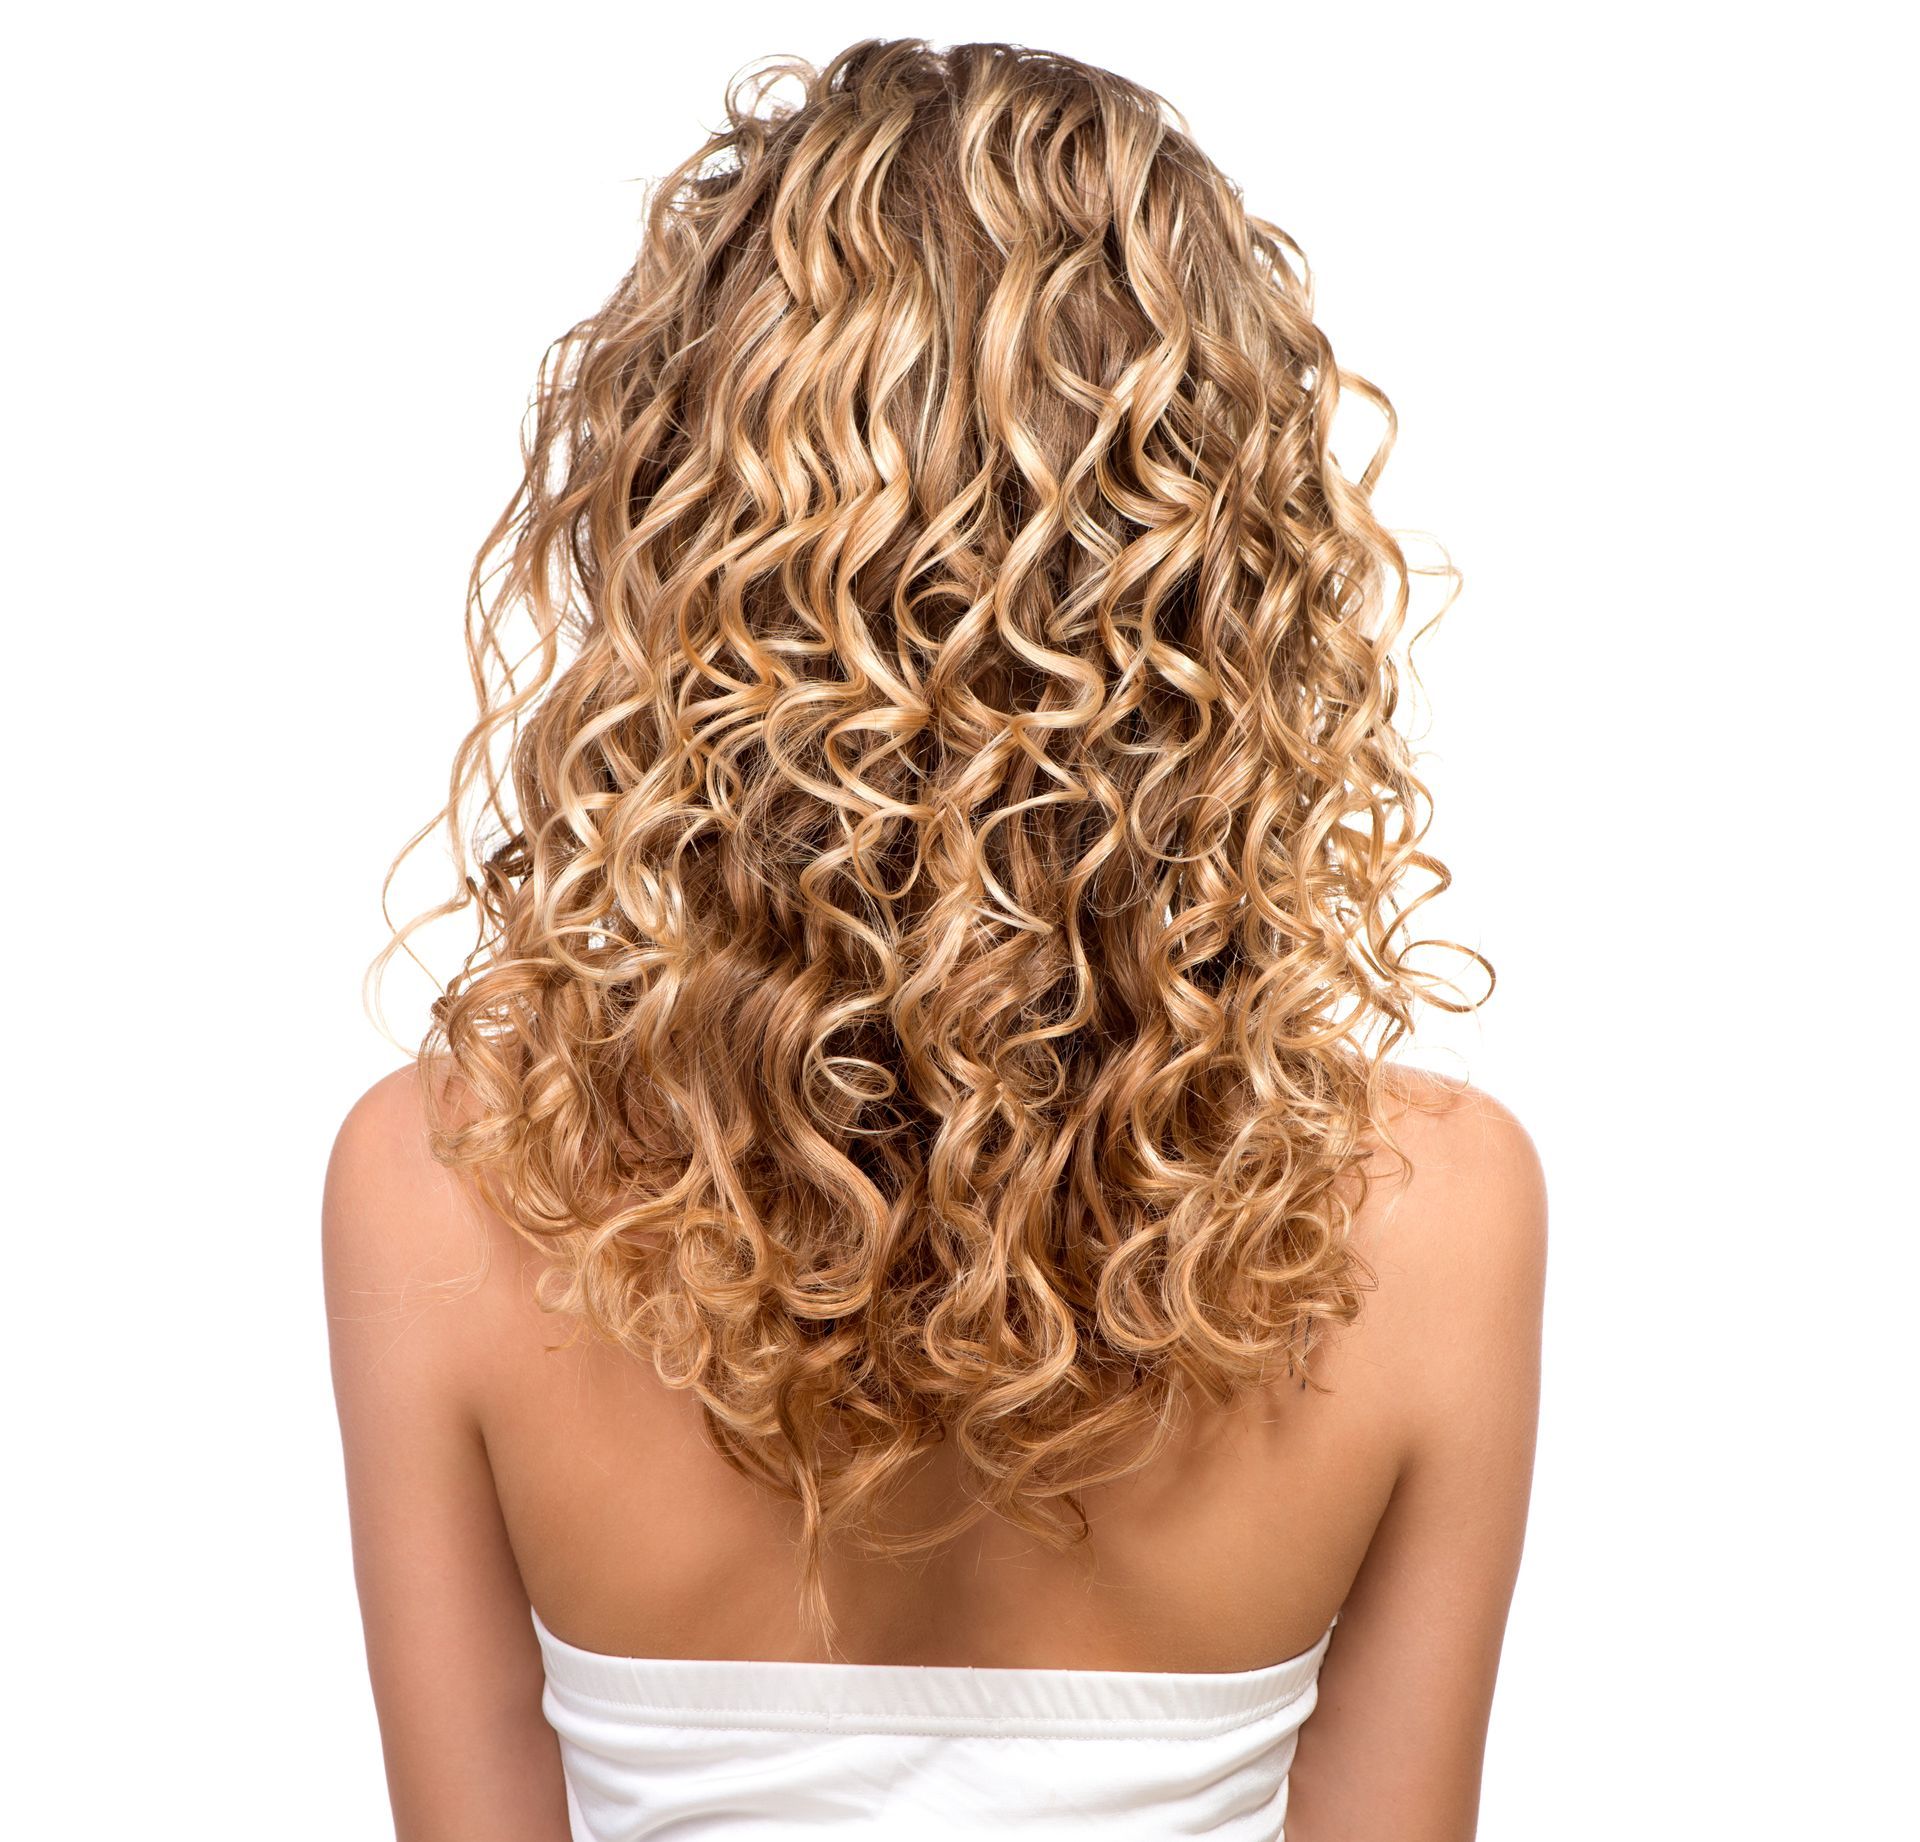 the back of a woman with long curly hair is shown .